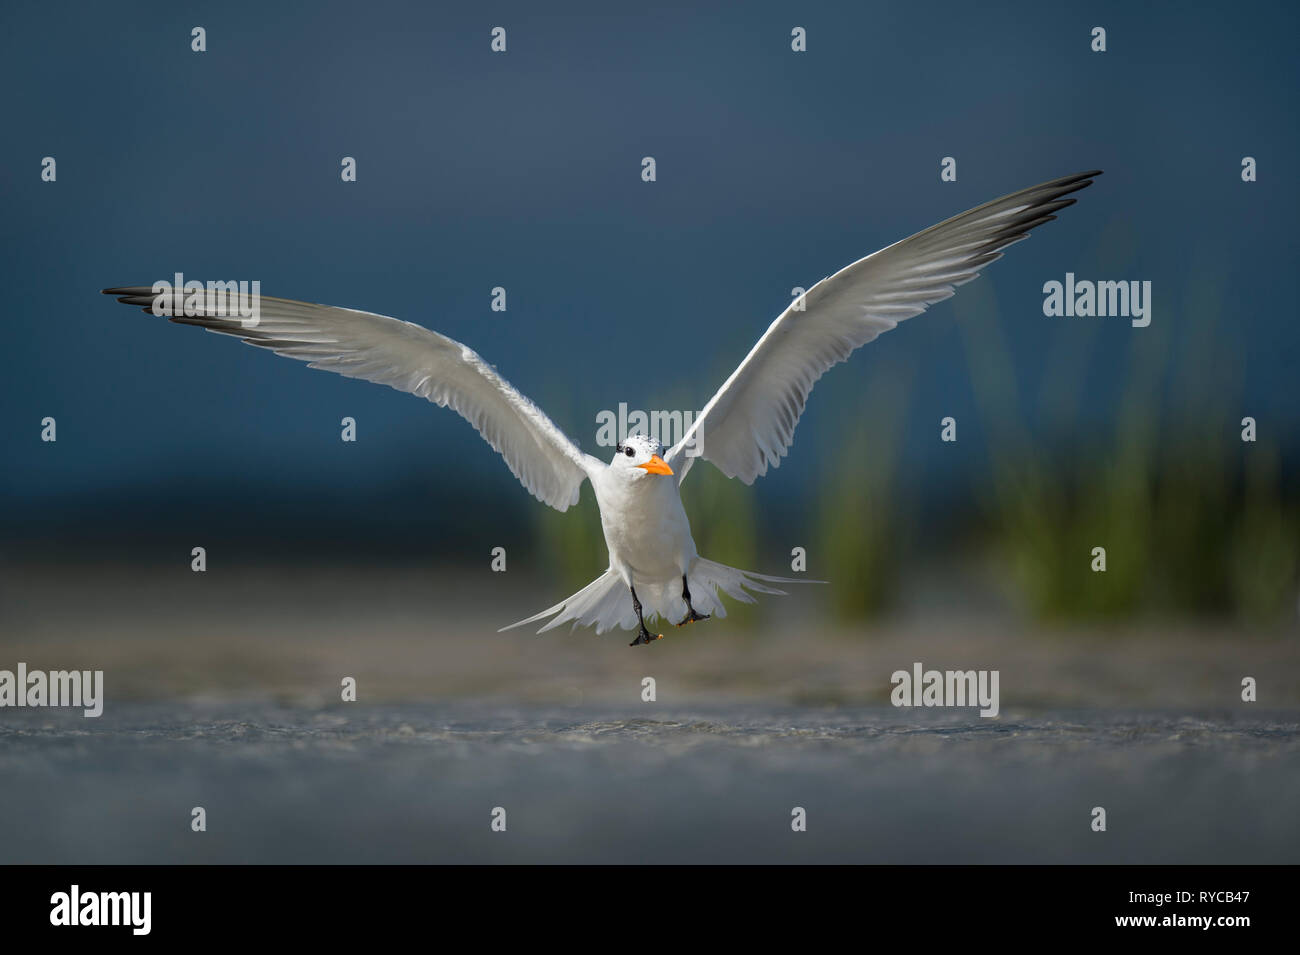 A Royal Tern flares its wings right before landing in the clear shallow water in a spotlight of sun with a dark stormy sky background. Stock Photo